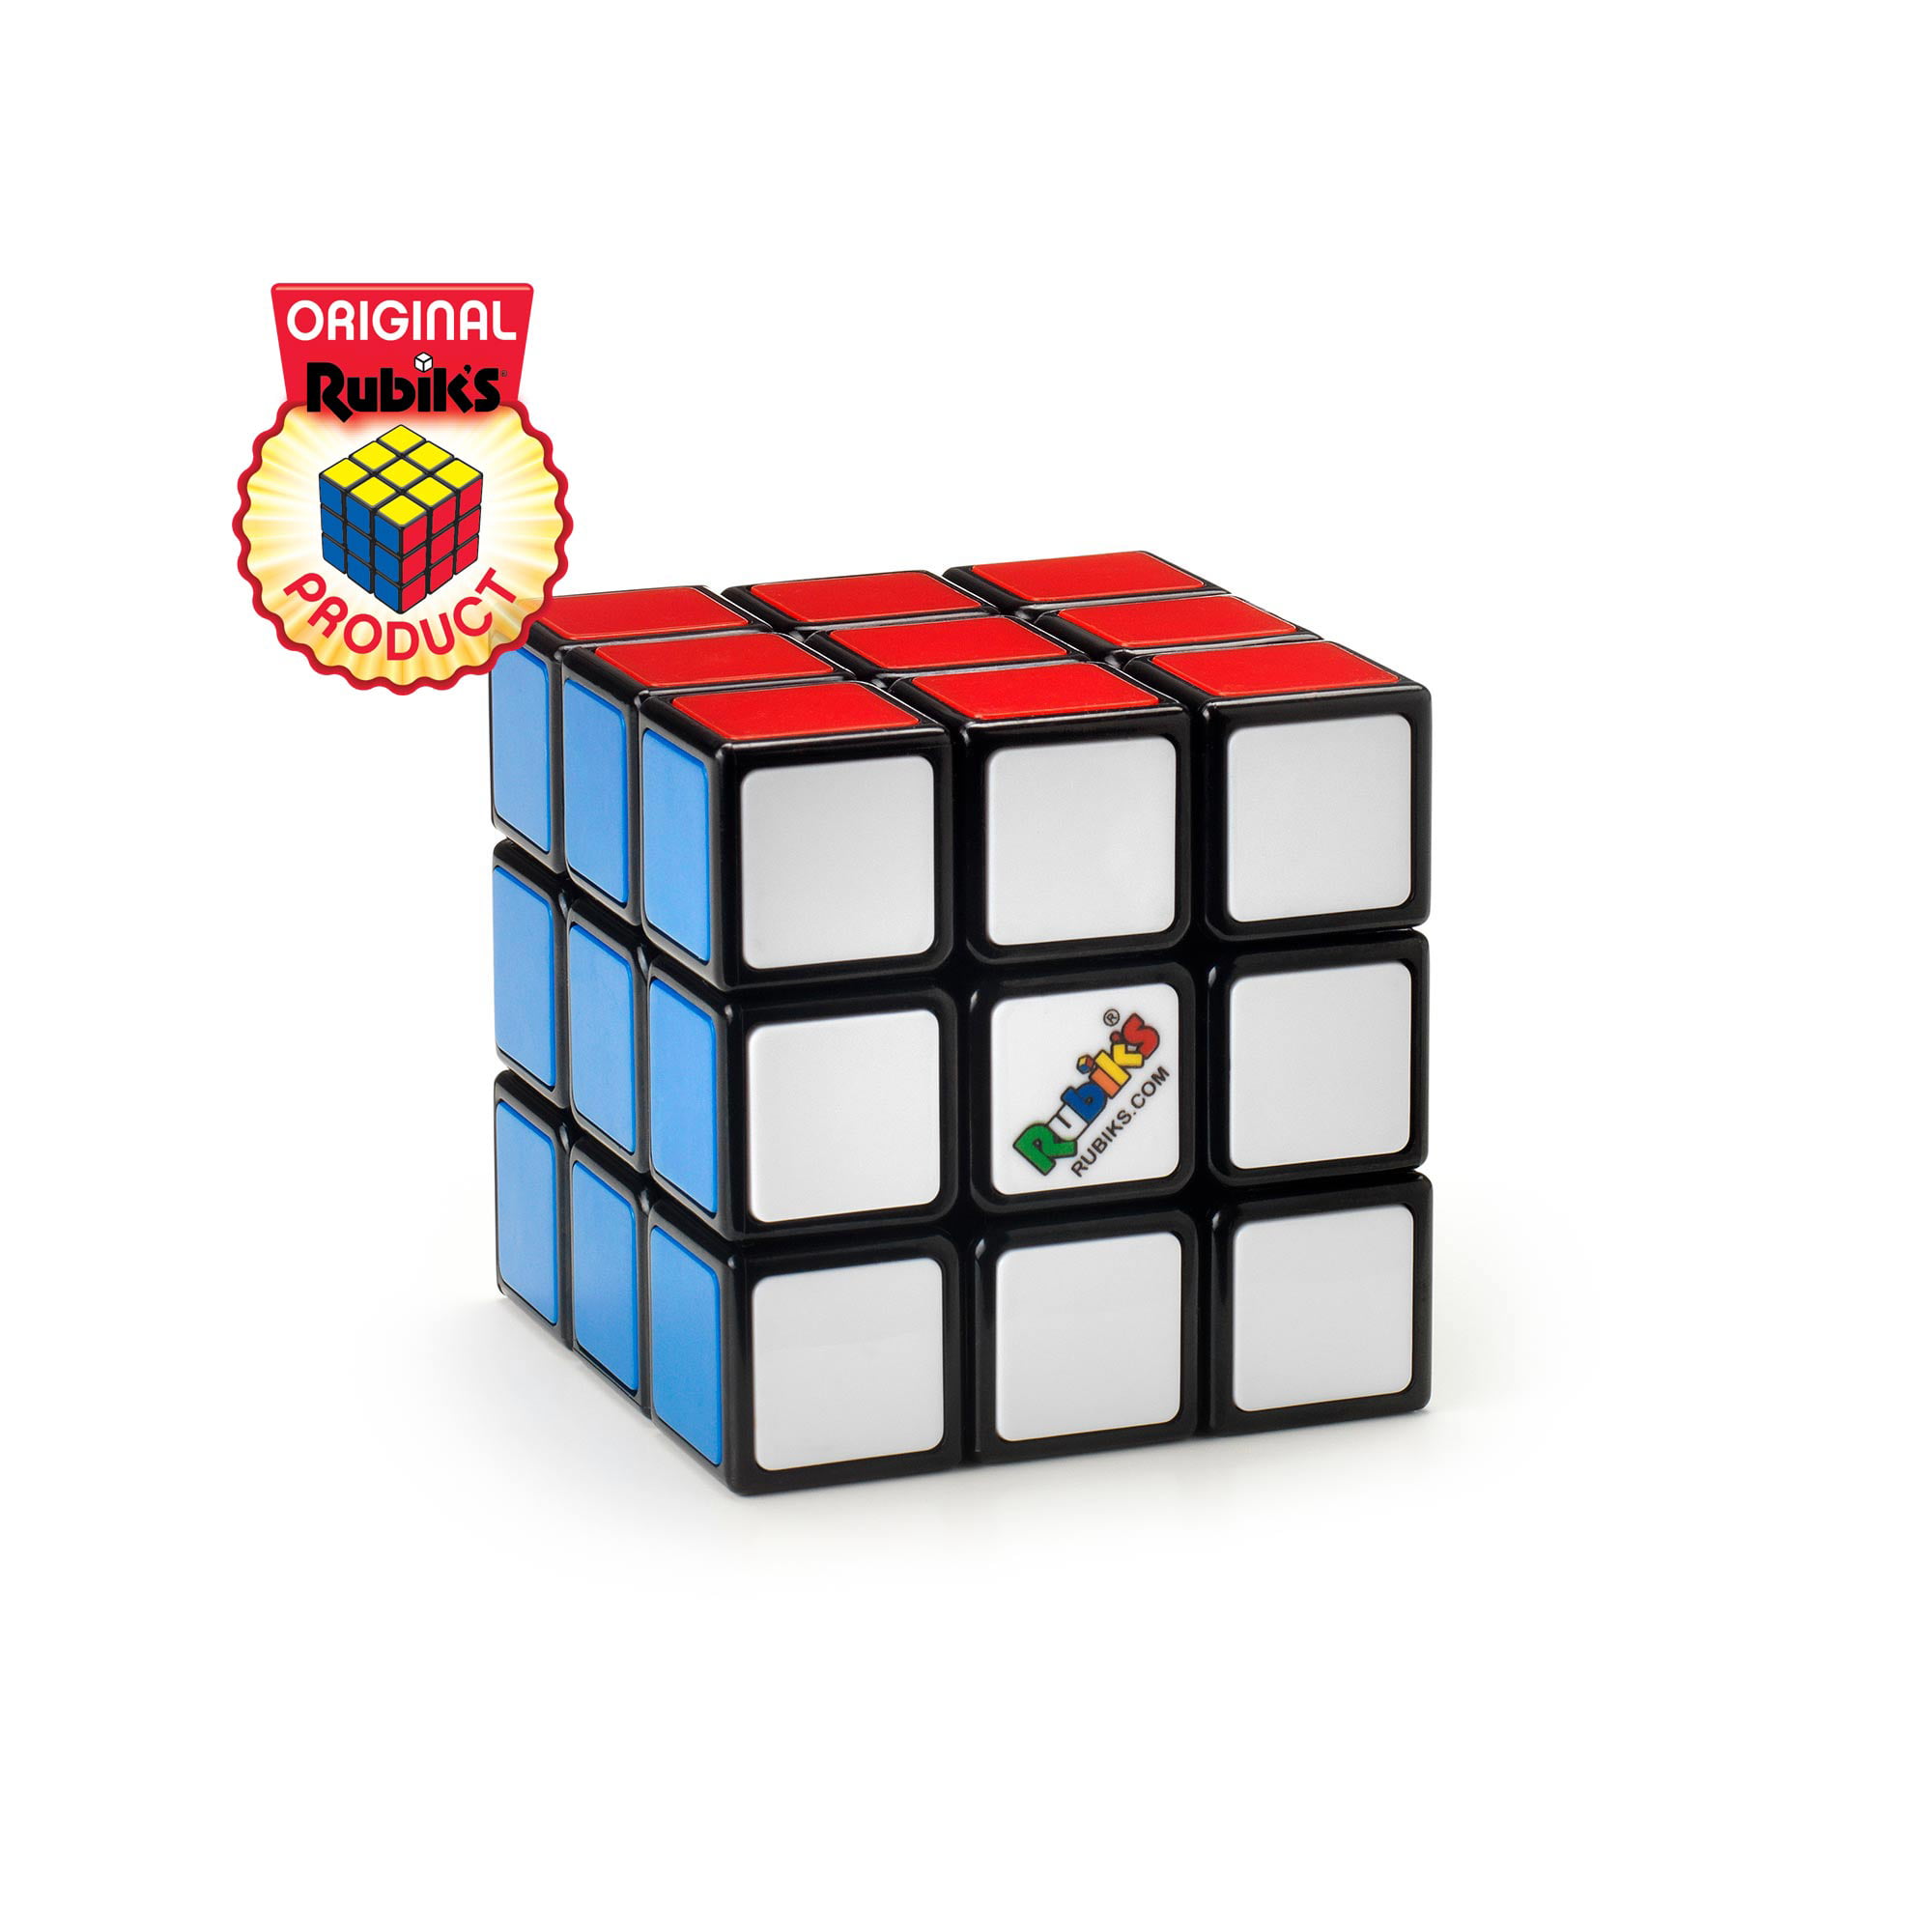 Rubik 3x3 Puzzle Cube Game With Stand Rubik's Hasbro Toy Original for sale online 